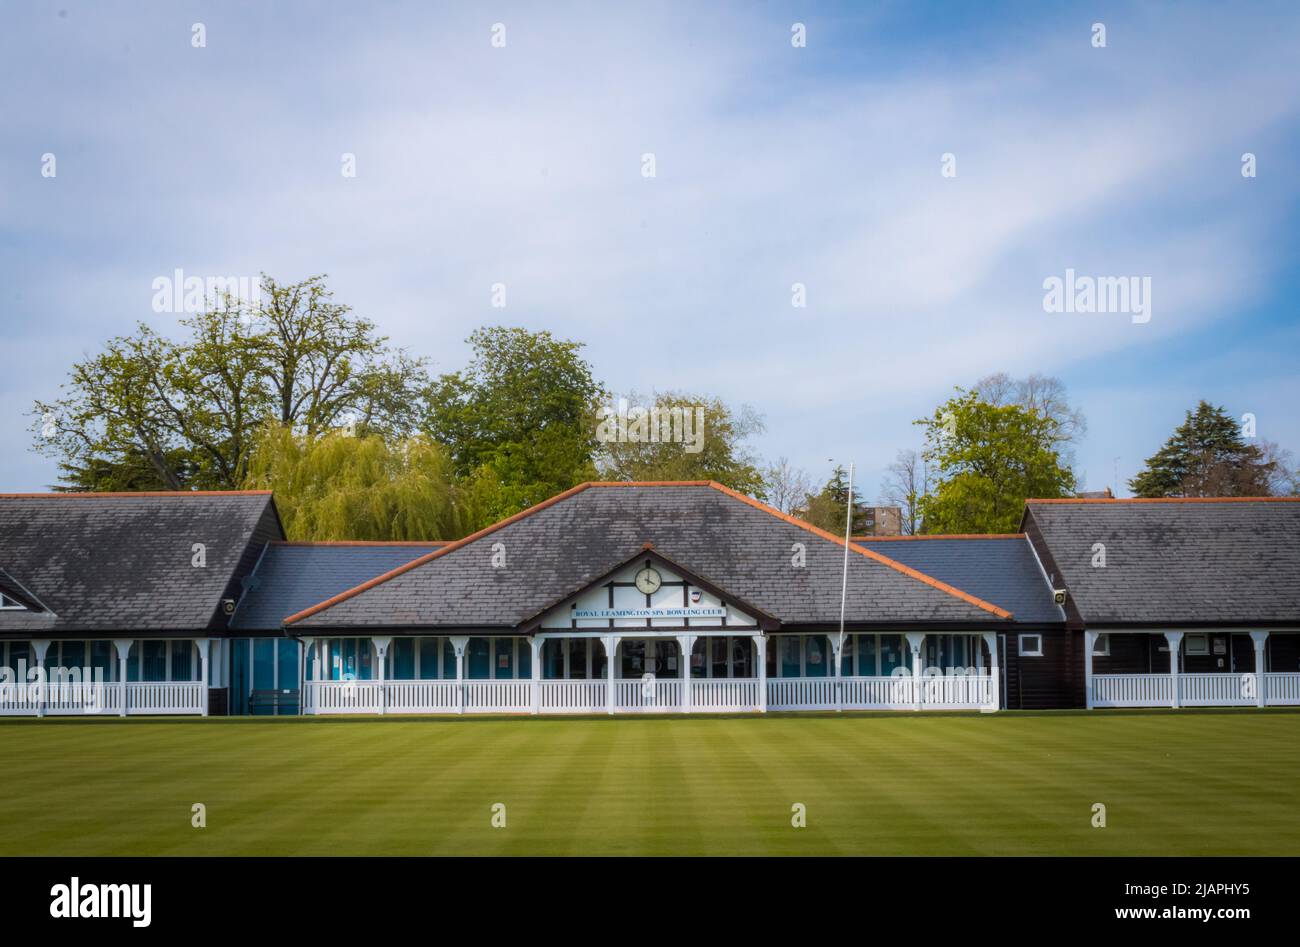 A local bowls club and the playing lawn. Stock Photo